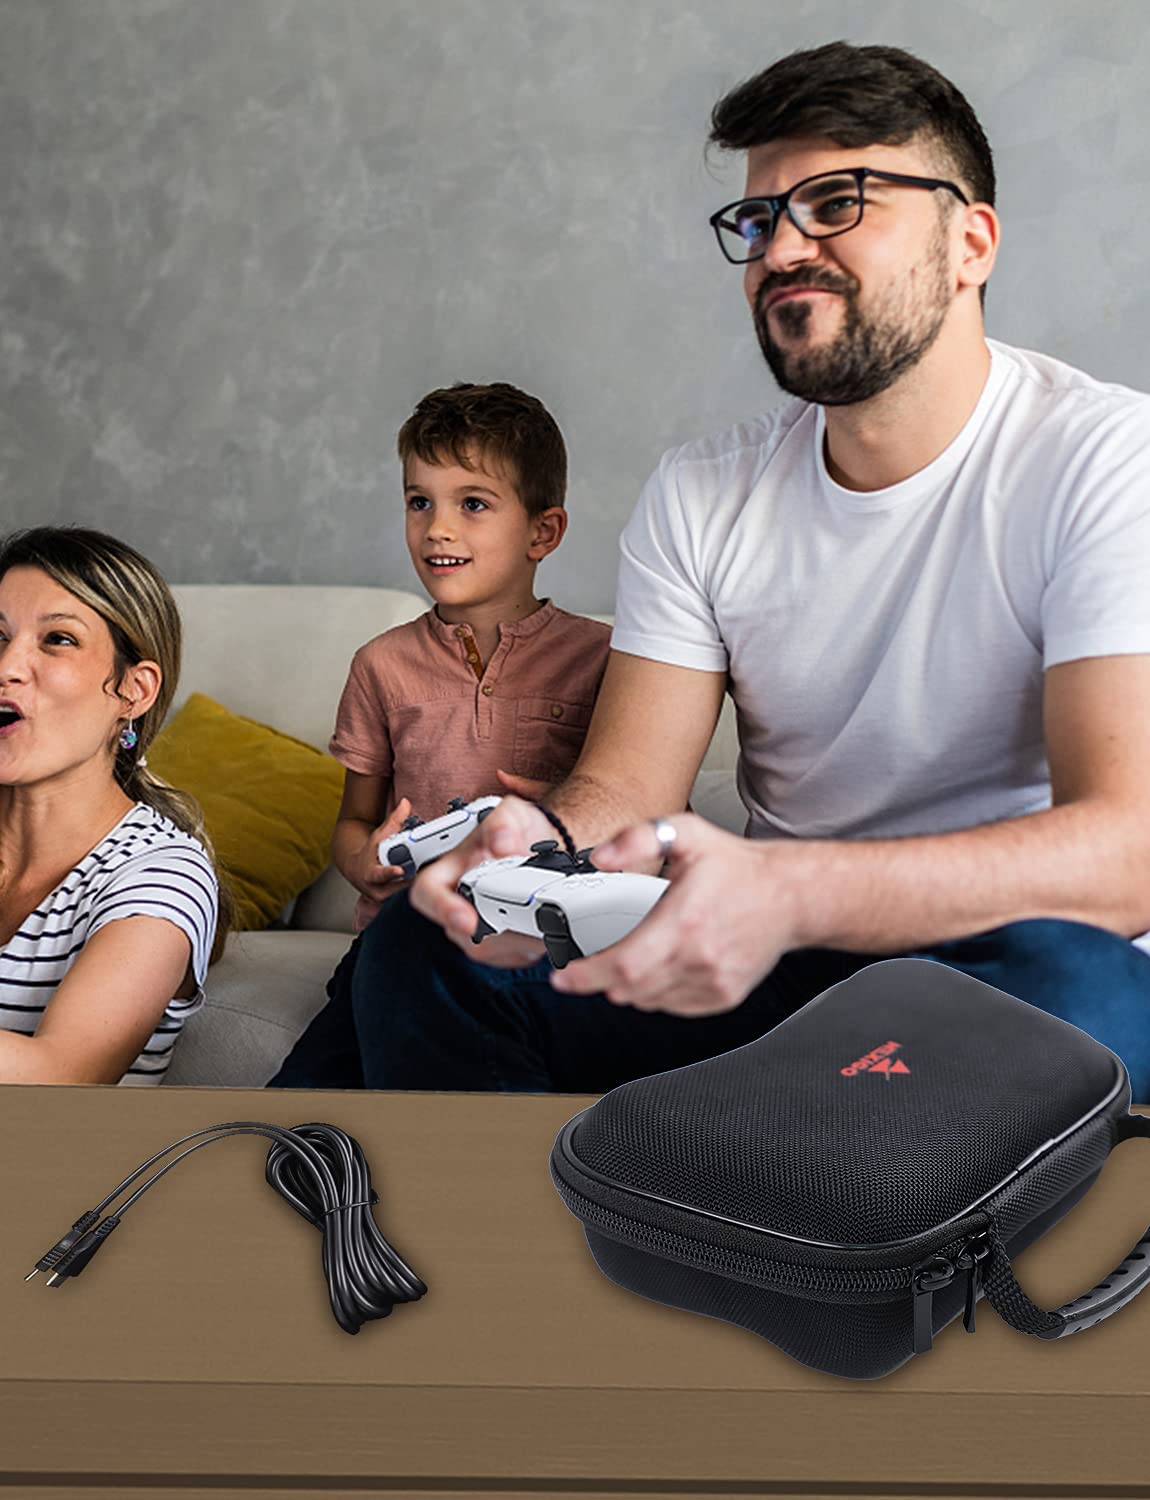 Shows a picture of a family scene using this NexiGo PS5 accessory kit